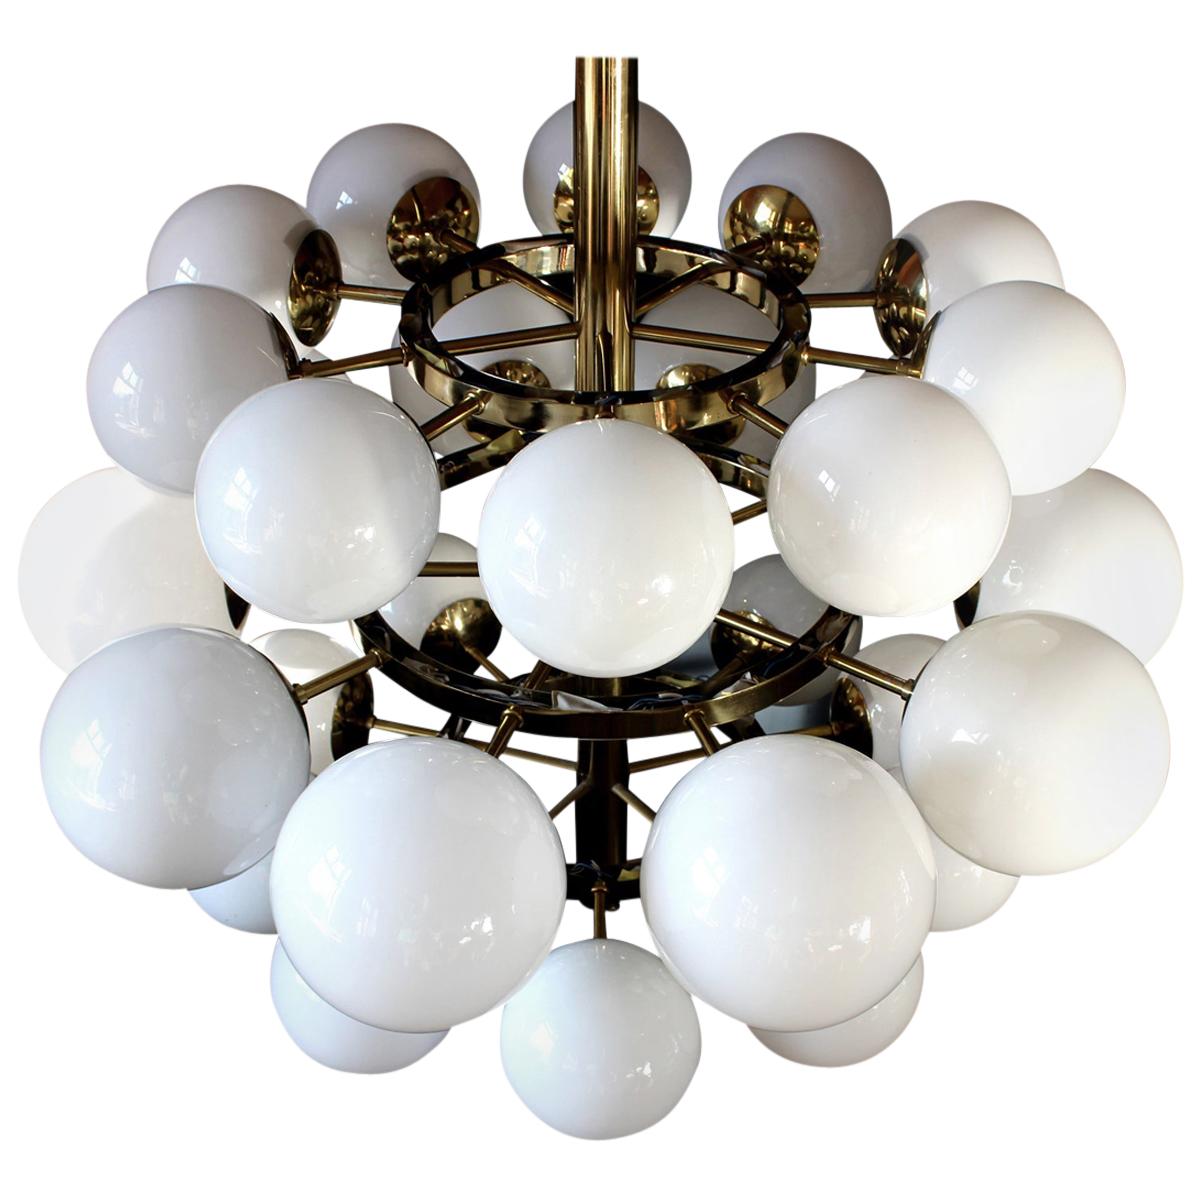 Gigantic Cinema Concert Hall Ceiling Lamp, Germany, 1960s-1970s For Sale